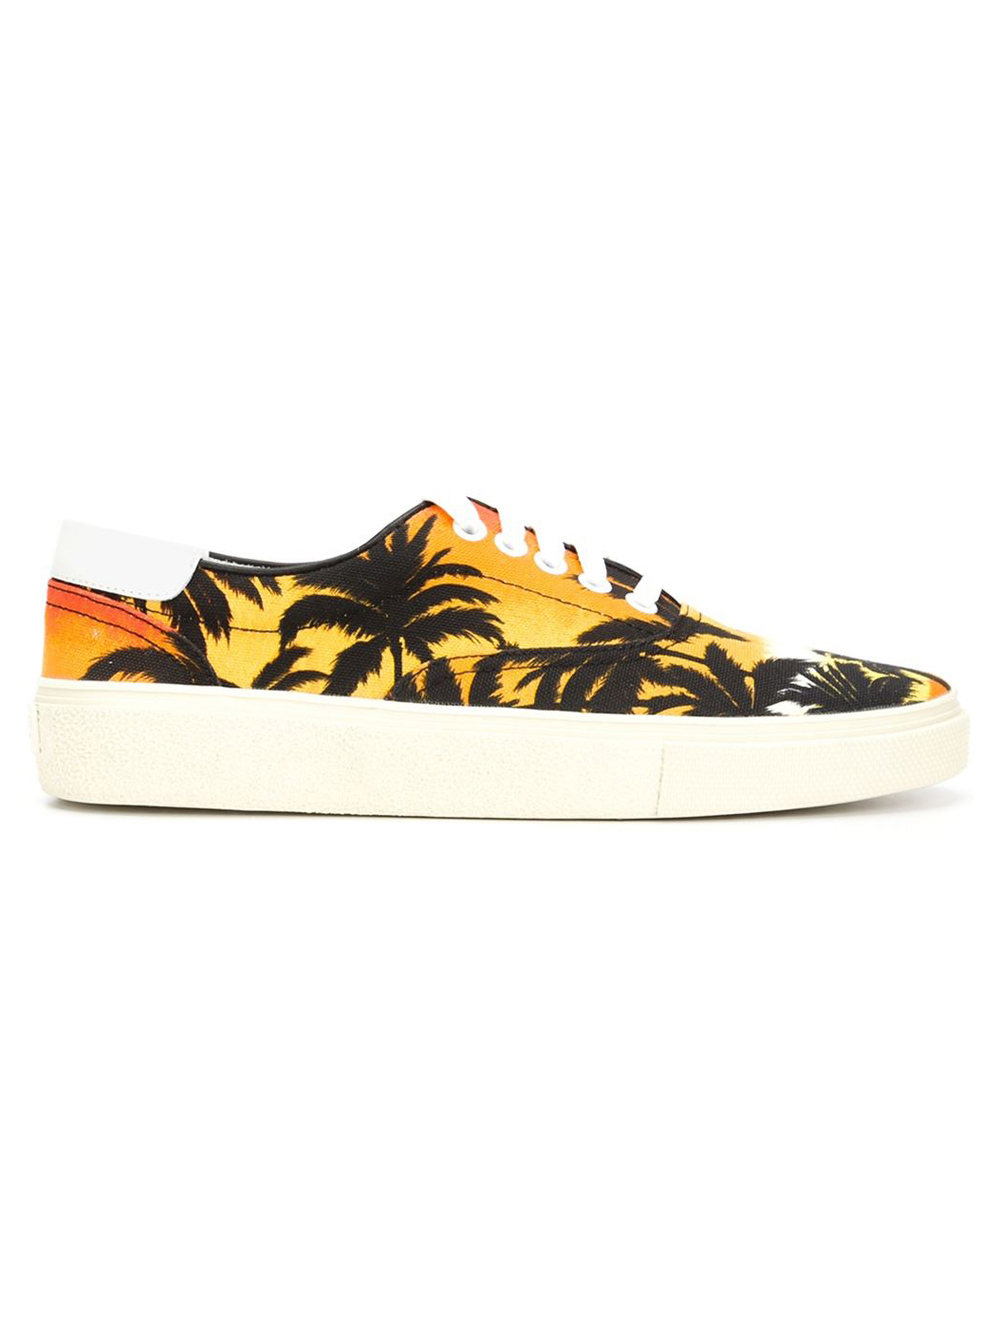 Saint Laurent Canvas Palm Tree Sneakers in Yellow - Lyst